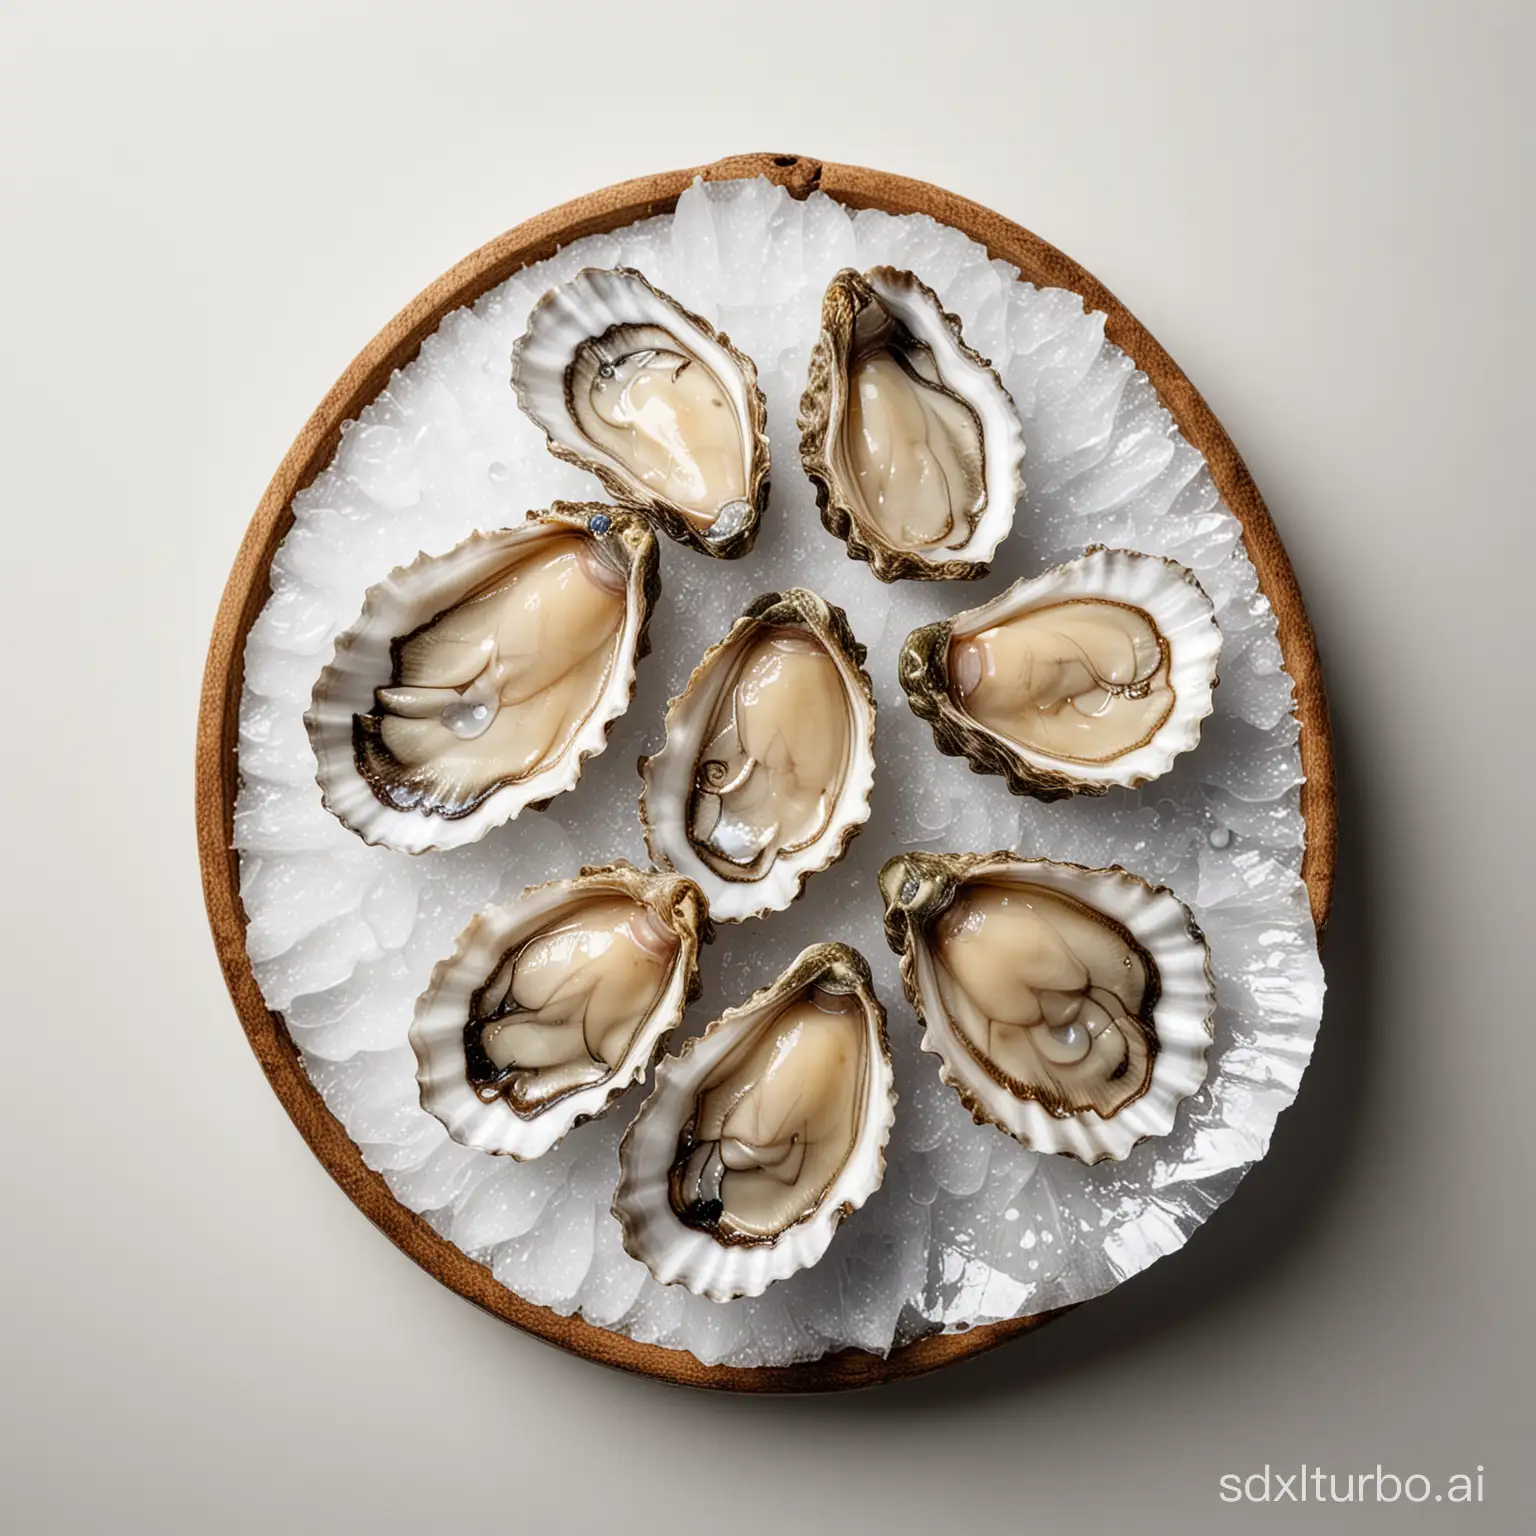 Fresh-Oyster-on-Clean-White-Background-Exquisite-Food-Photography